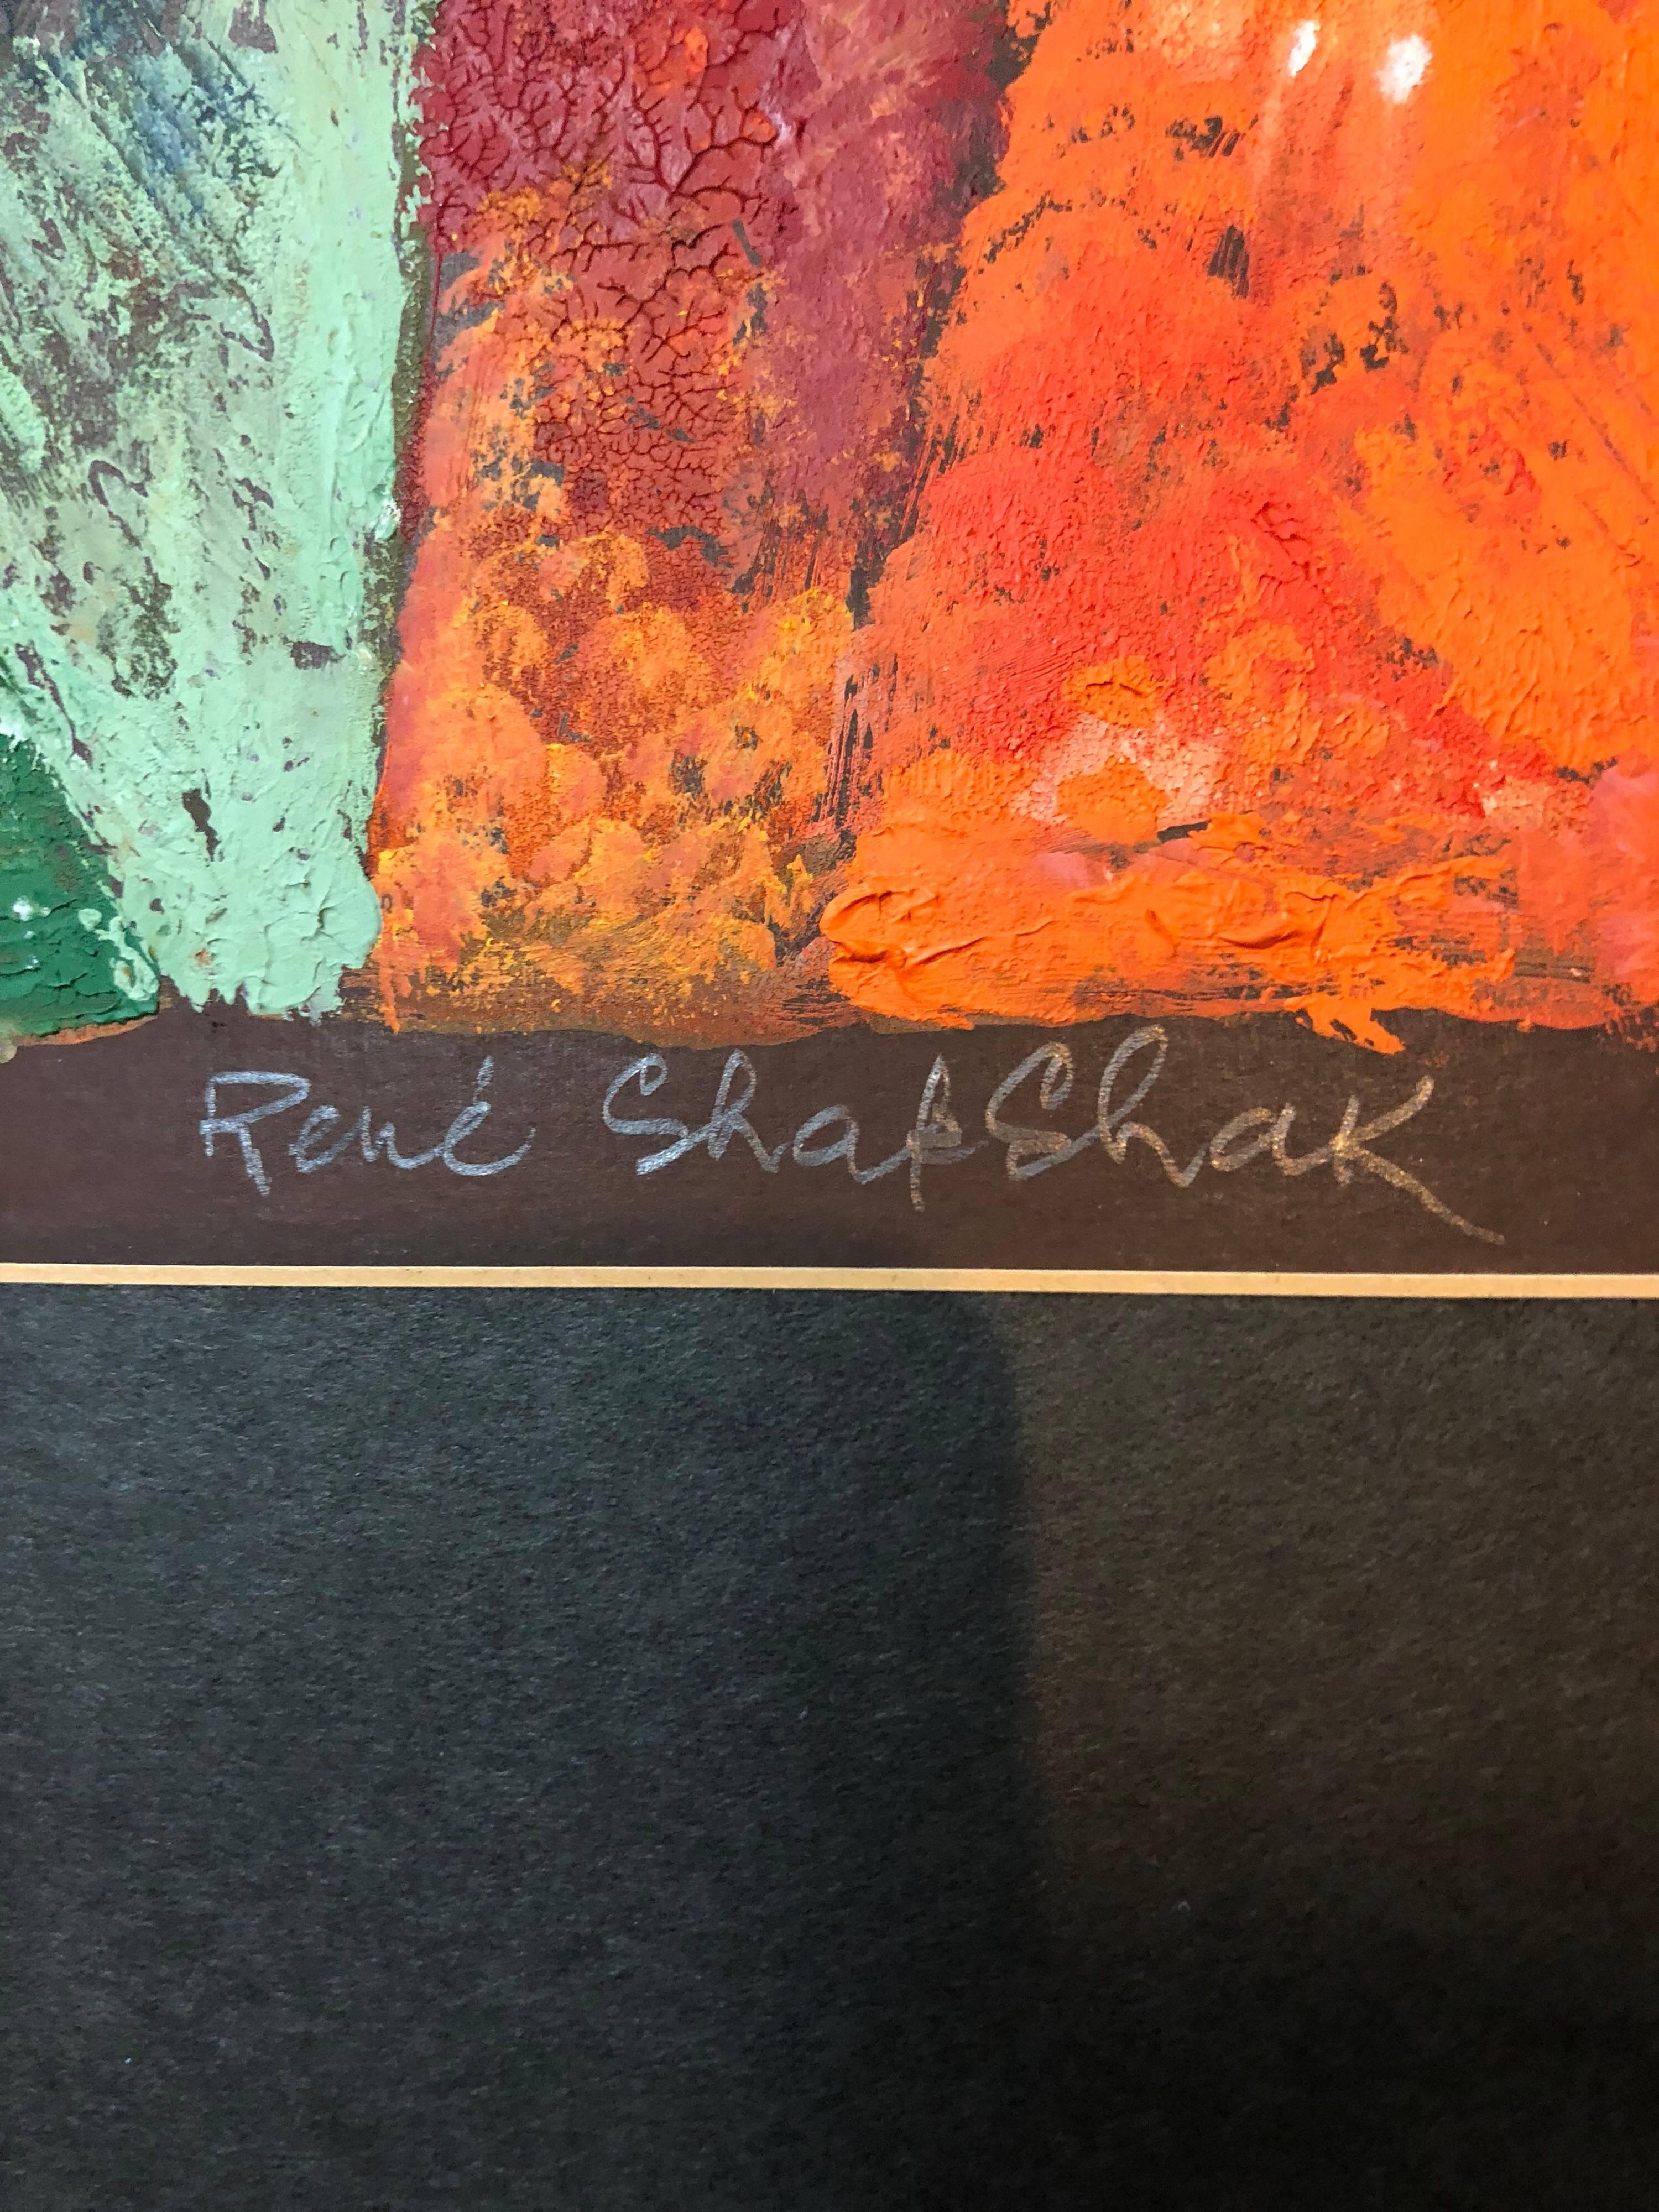 21.5x17 with mat , 14.5x10.75 without mat. 
Noted artist and sculptor, Dr. Rene Shapshak was born in Paris, studied at the École des Beaux-Arts in Paris (that produced such giants as Claude Monet and Pierre Renoir), London, Bruxelles, emigrated to